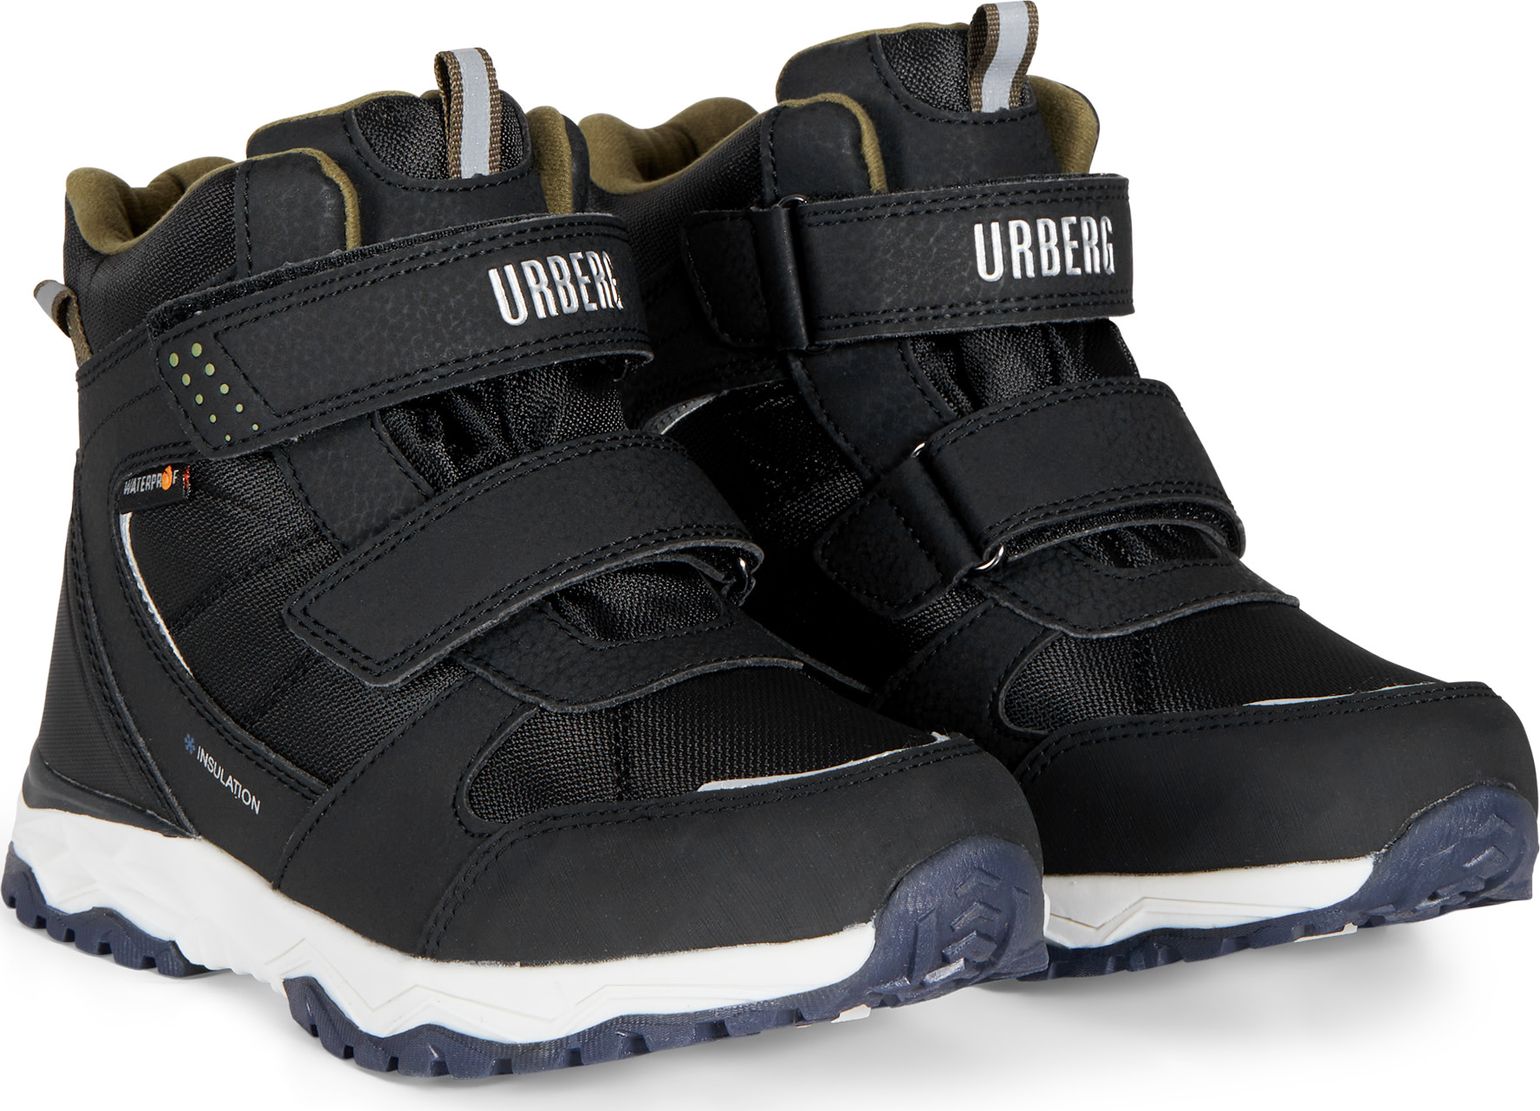 Urberg Kids' Ice Boot Black Beauty/Capers